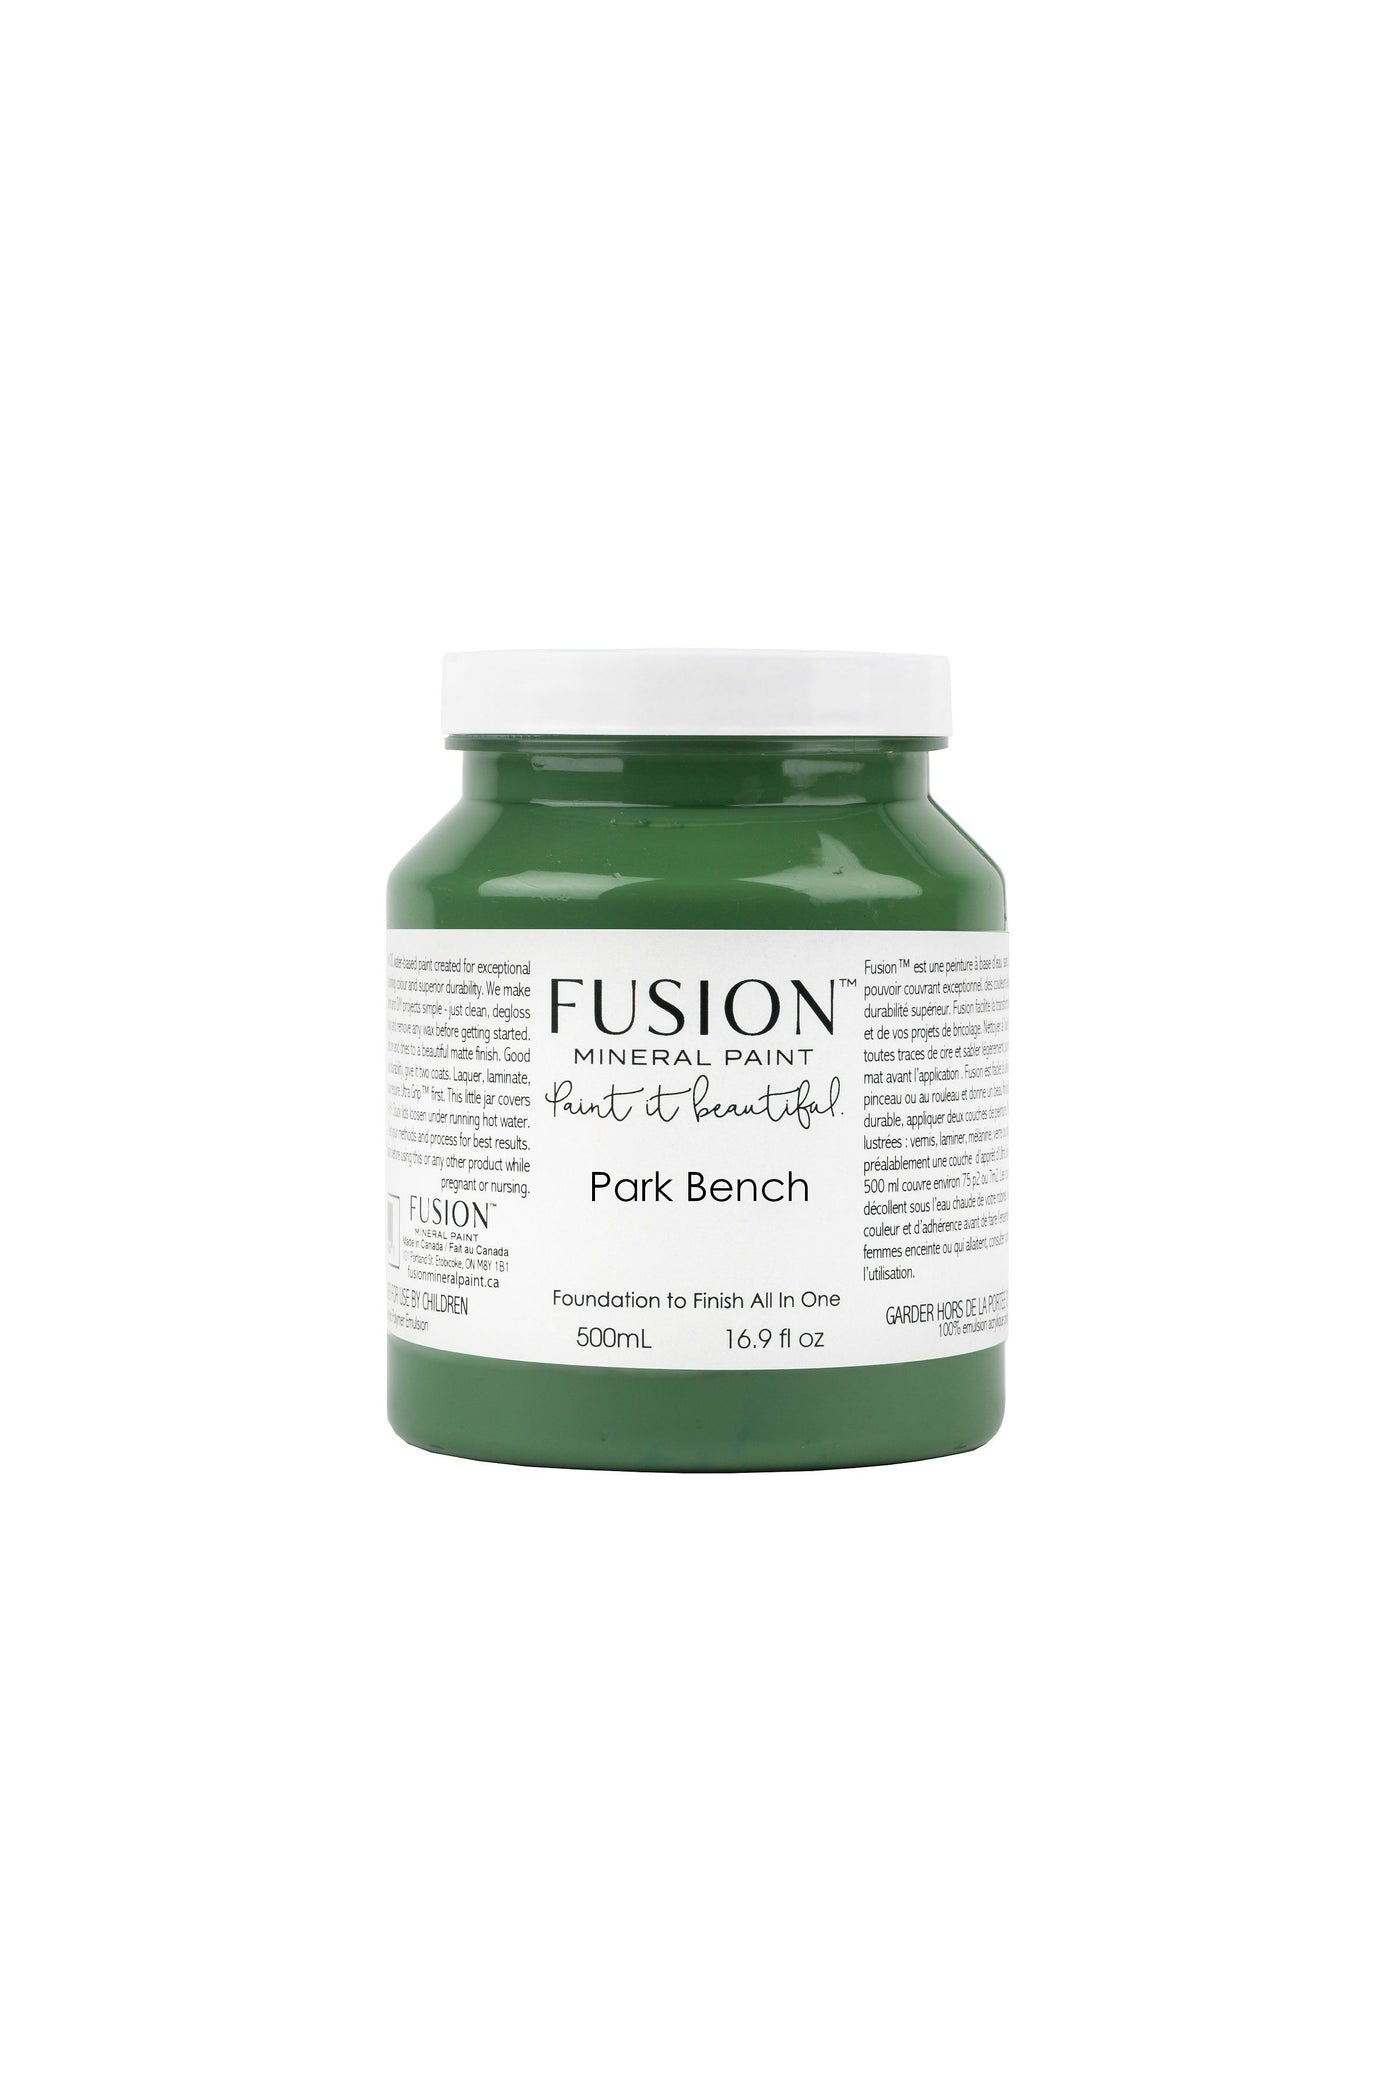 Fusion Mineral Paint - PARK BENCH bold historic green 500ml